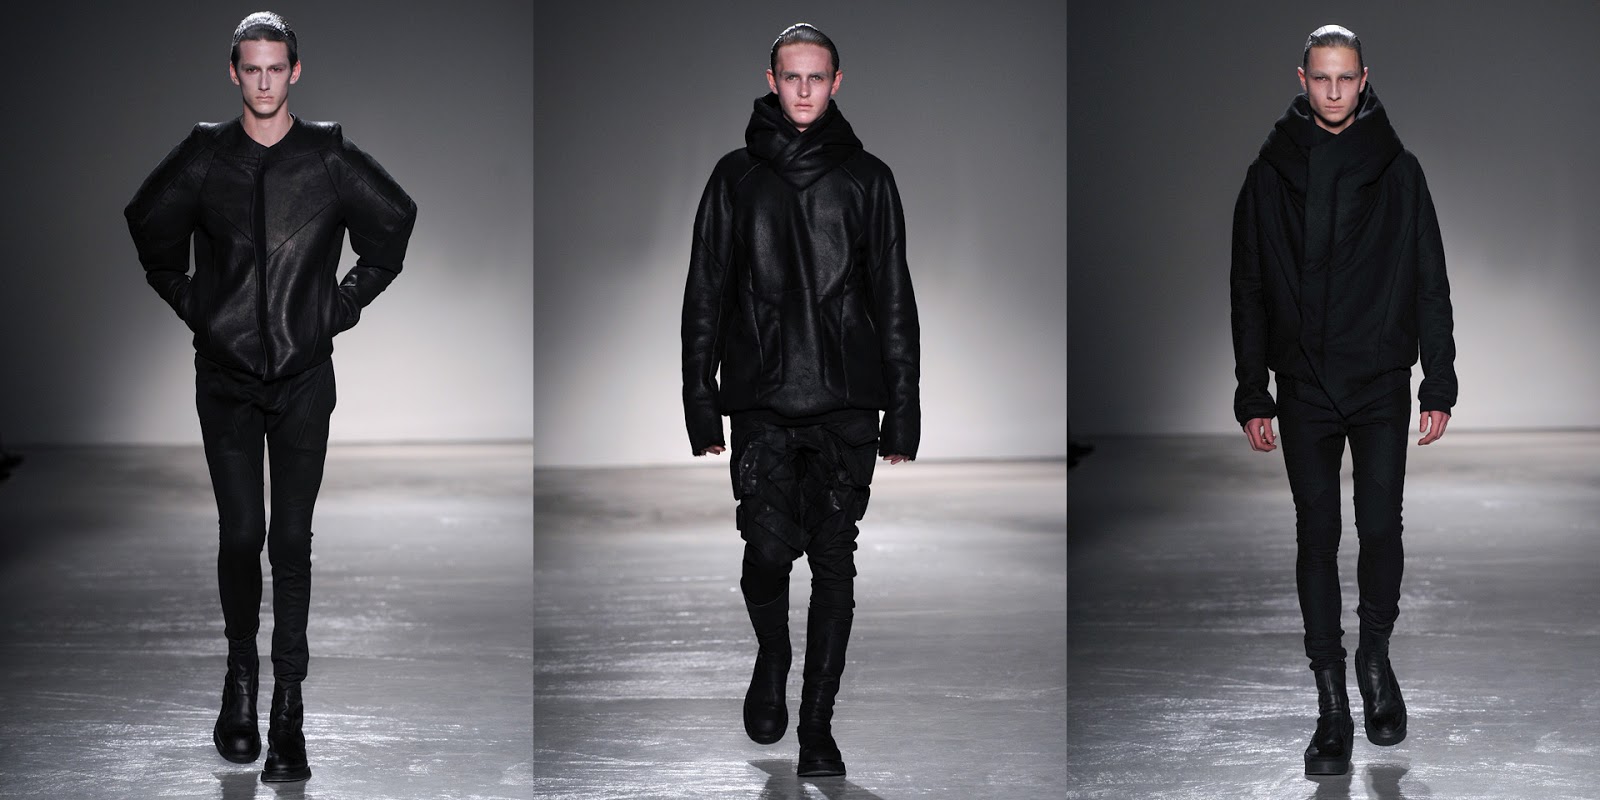 Julius - A/W 2015 | In search of the Missing Light